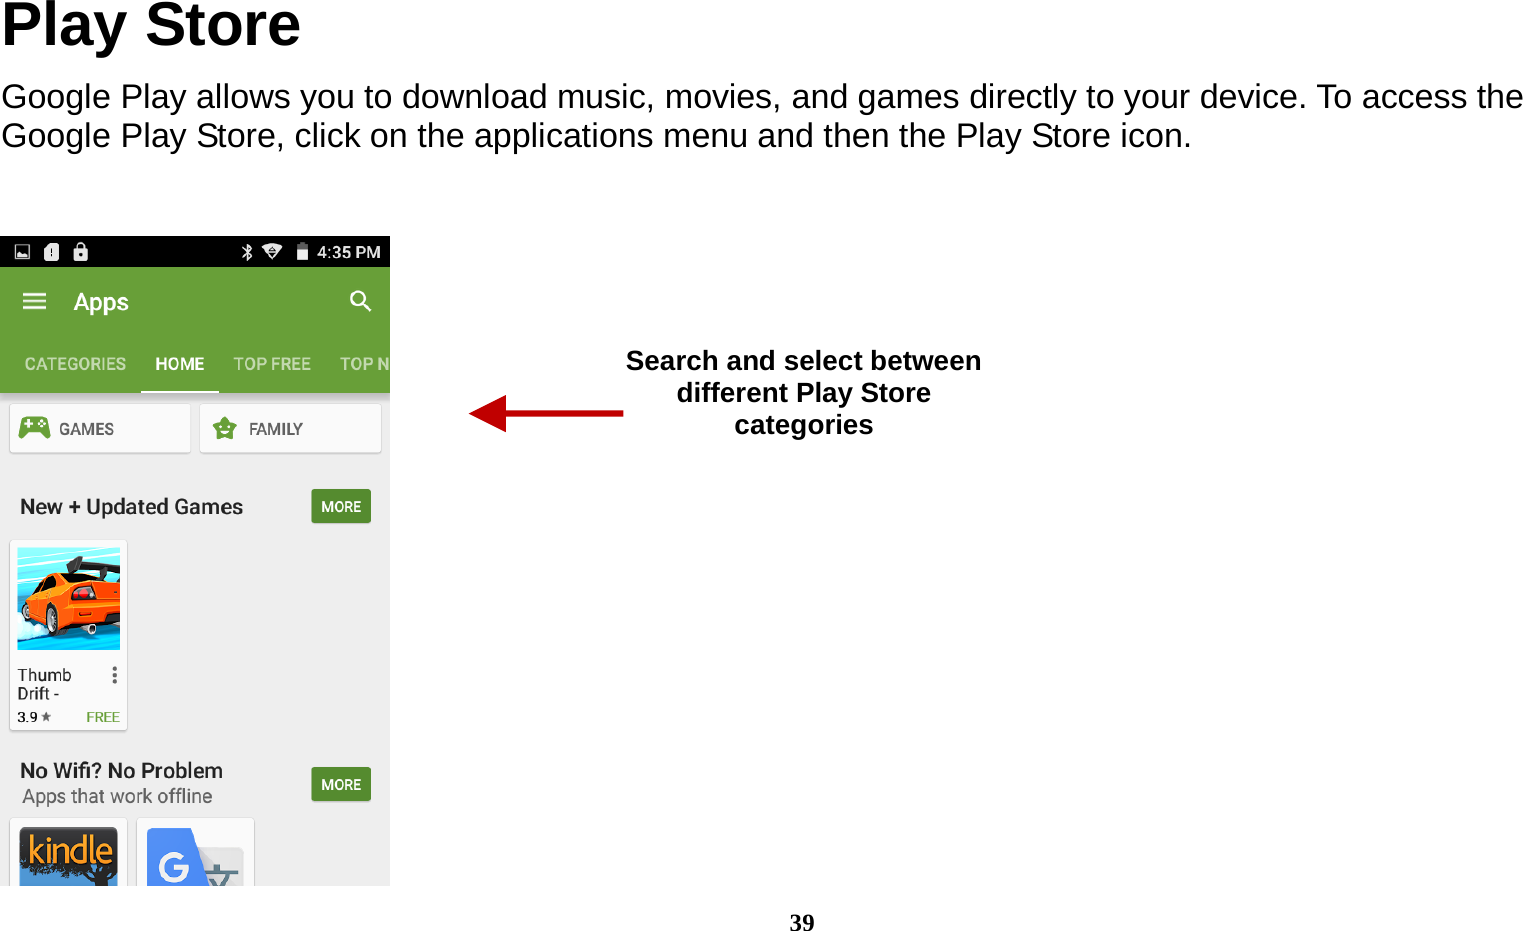  39 Play Store Google Play allows you to download music, movies, and games directly to your device. To access the Google Play Store, click on the applications menu and then the Play Store icon.    Search and select between different Play Store categories 